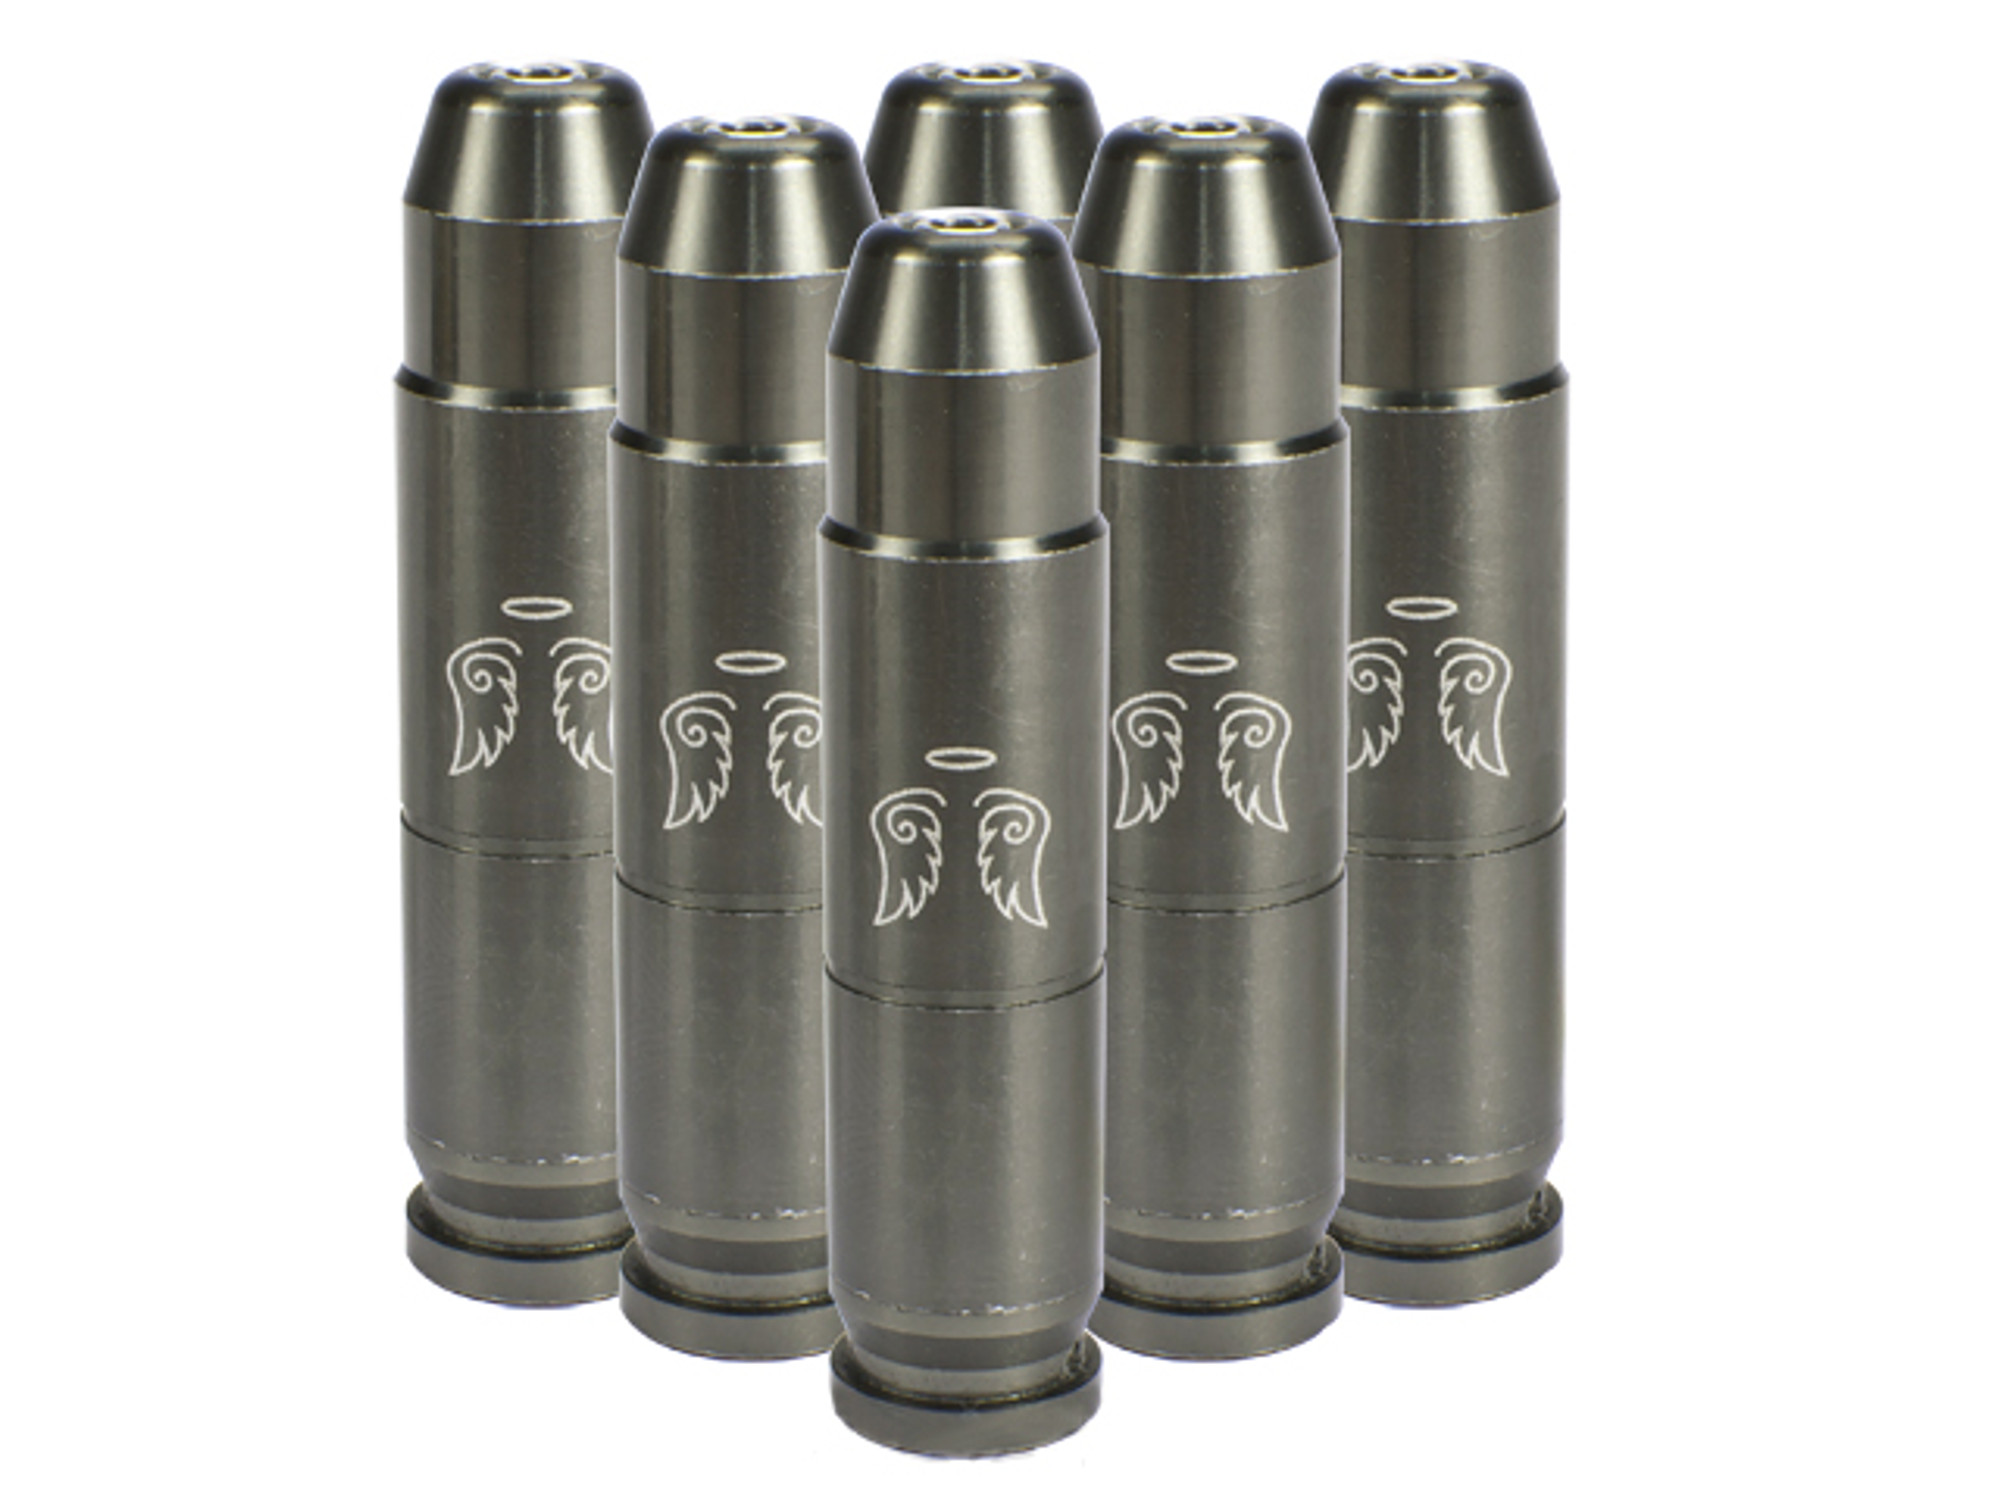 APM50 Cartridge Shell Set for APS M50 Co2 Airsoft Sniper Rifles (FPS: Angel / 380-430)